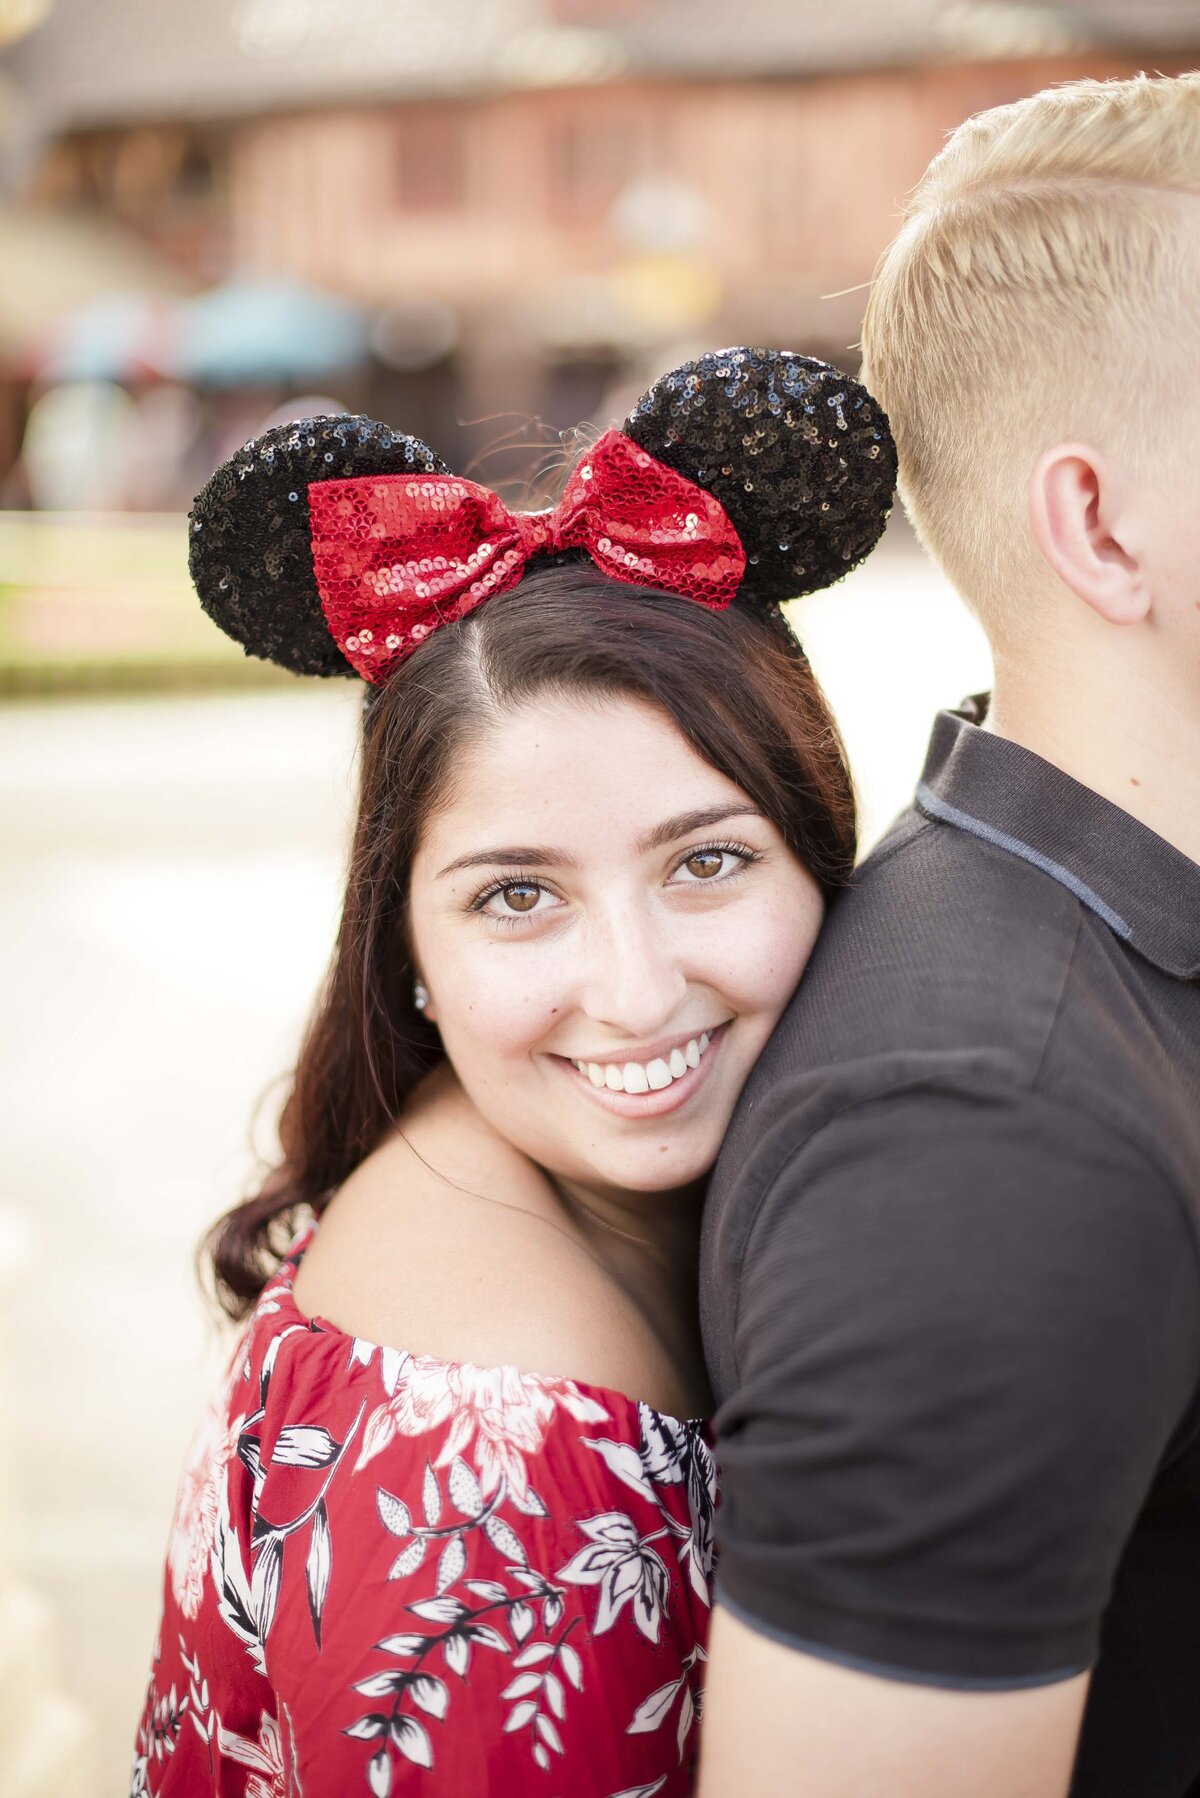 Surprise proposal at Disney World photographed by Schwalbs Photography